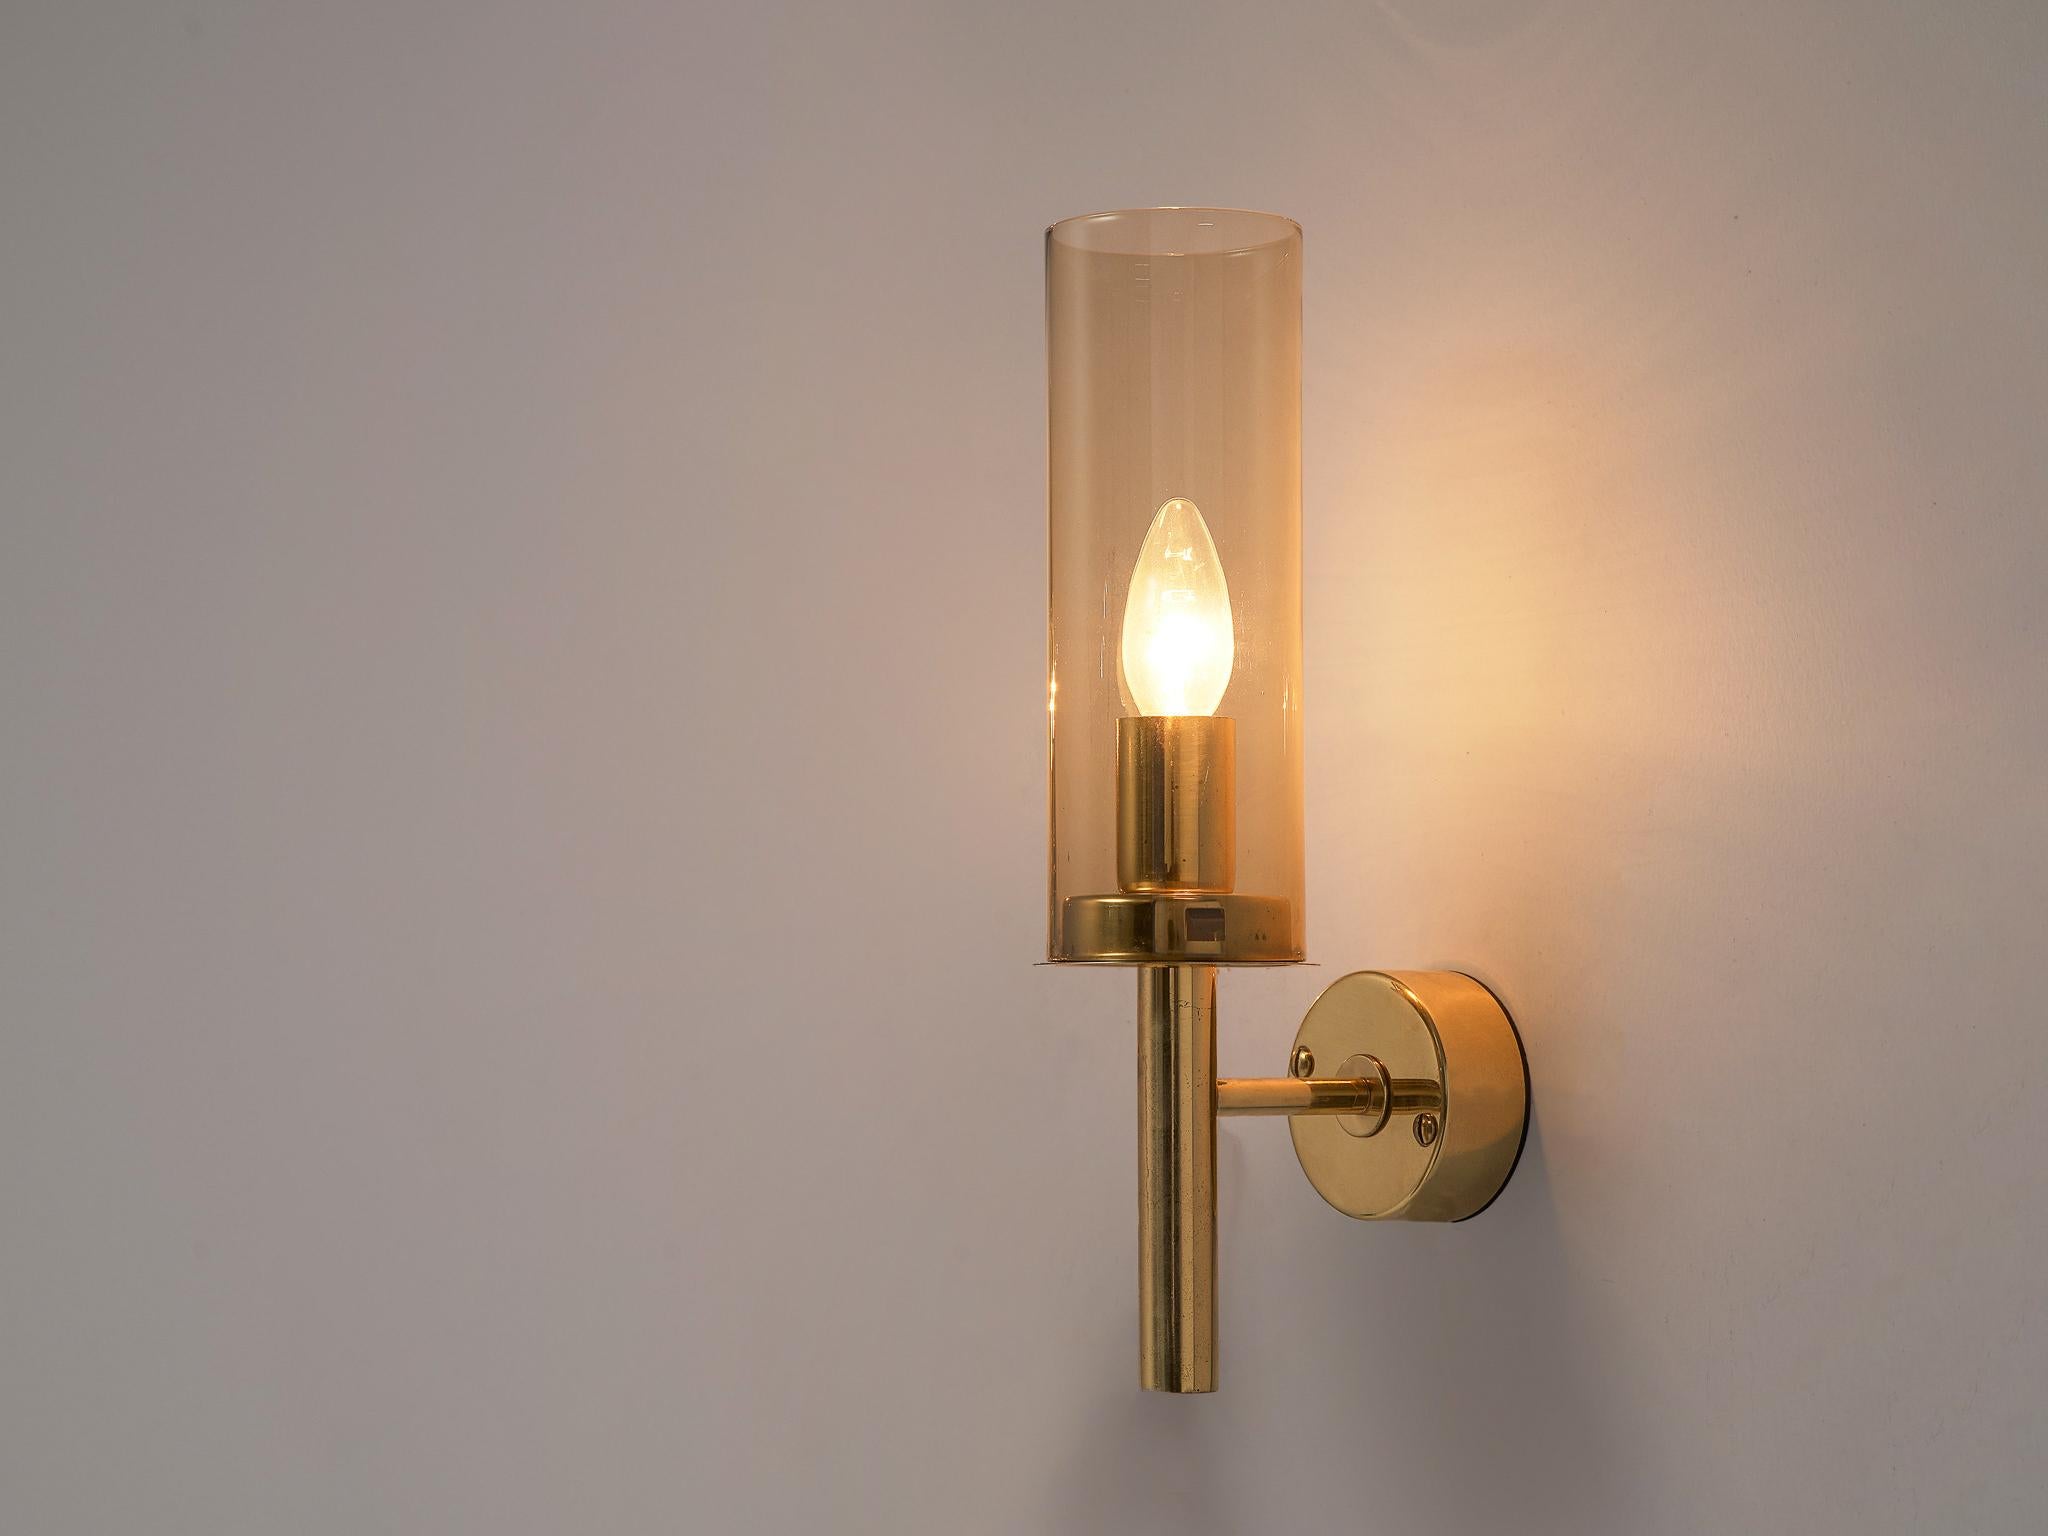 Hans-Agne Jakobsson for Hans-Agne Jakobsson AB in Markaryd, wall light model V-169, brass, glass, Sweden, 1960s

This beautiful brass and glass wall lamp, model V-169 from the 'Sonata' collection, was designed by Hans-Agne Jakobsson in Sweden during